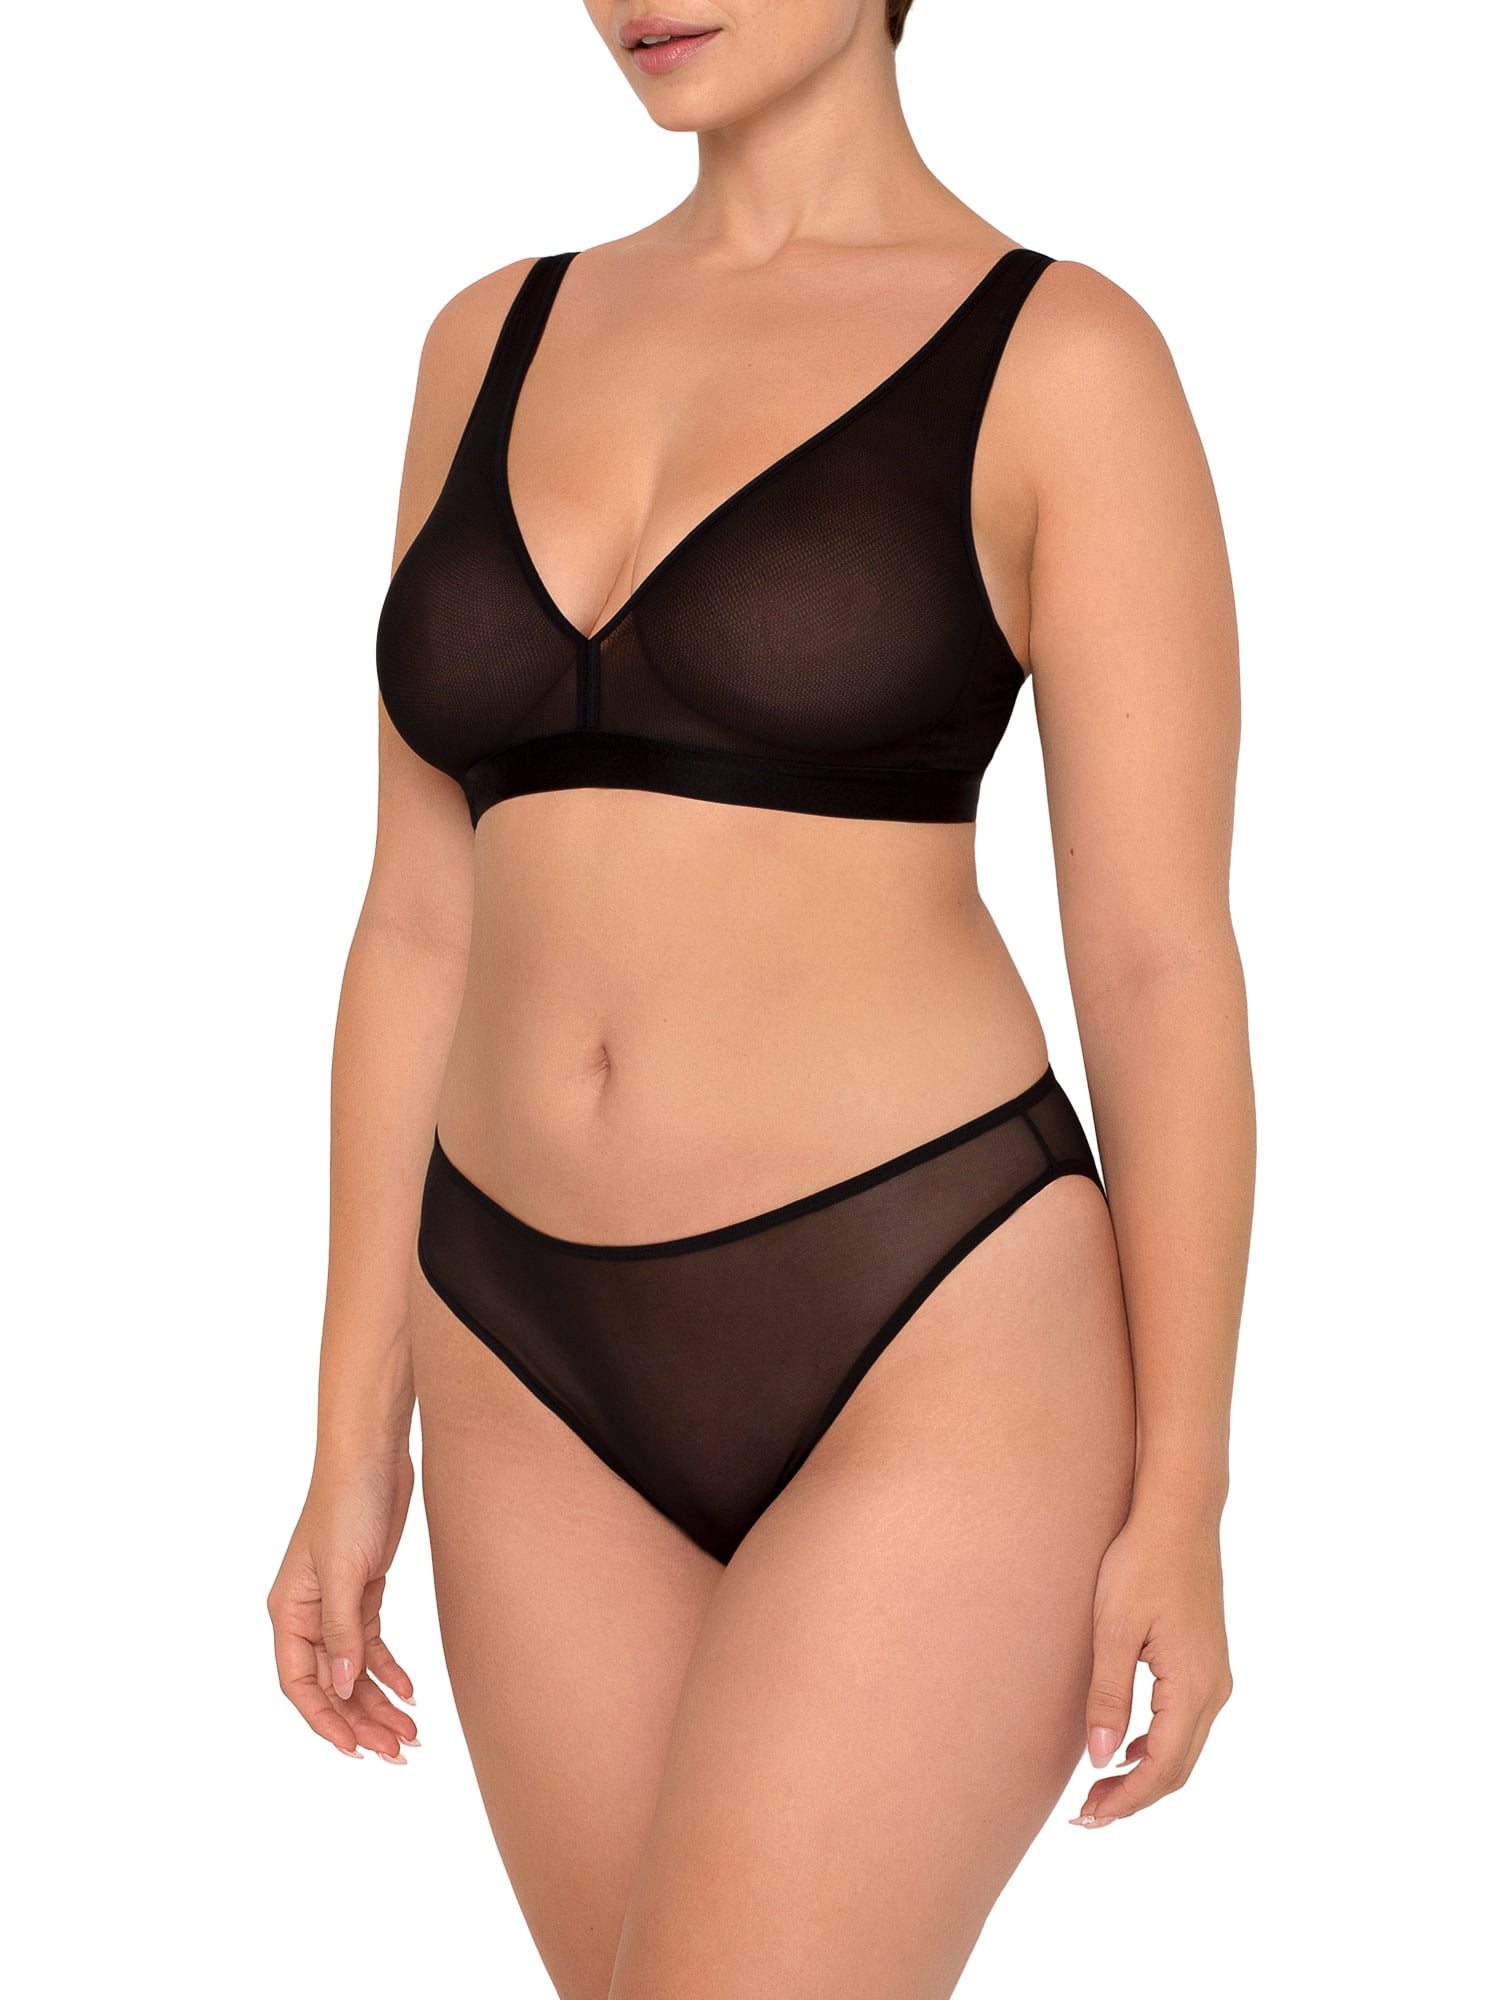 DELIMIRA Women's Balconette Bra Push Up Underwire Unlined Sexy See Through  Bras Plus Size Eggplant 32B at  Women's Clothing store